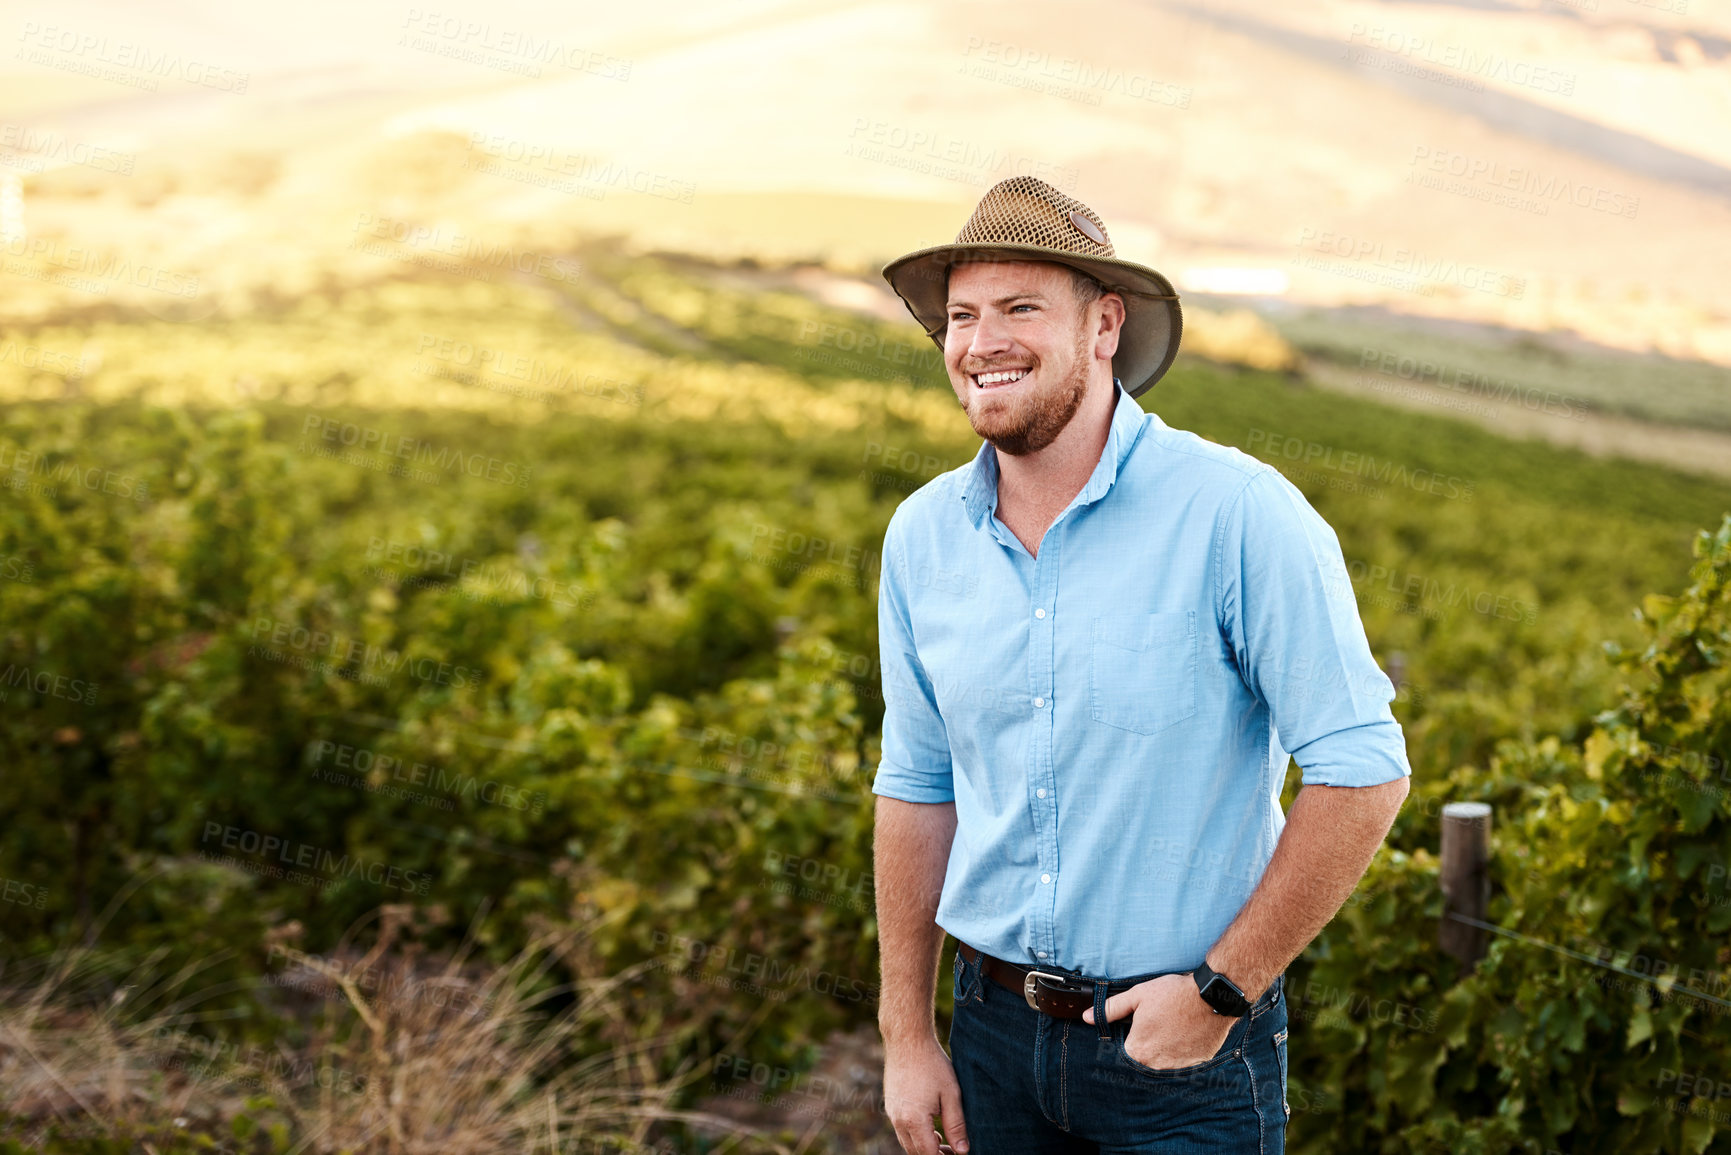 Buy stock photo Shot of a farmer standing in a vineyard